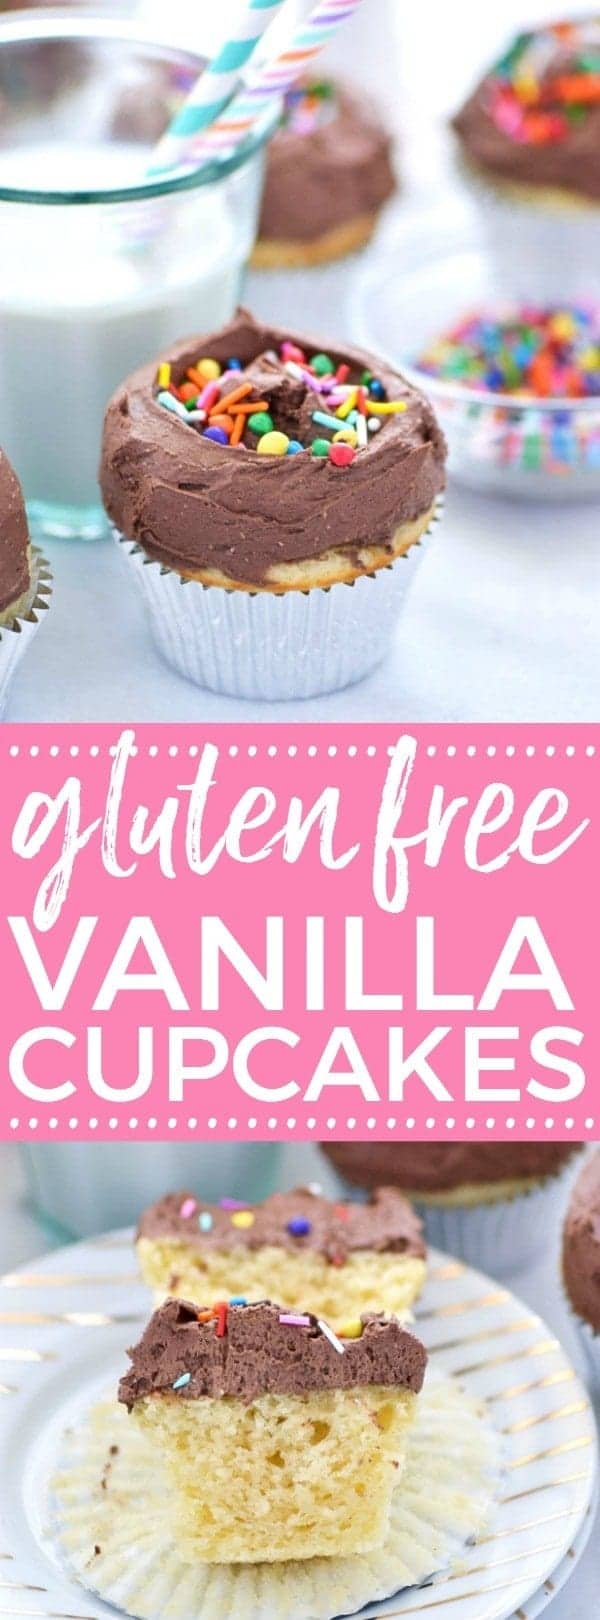 Super moist and insanely delicious gluten free vanilla cupcakes. These are perfect for a party! Easy dessert recipe from @whattheforkblog | whattheforkfoodblog.com | gluten free desserts | easy cupcake recipes | yellow cupcakes with chocolate frosting | birthday cakes | cupcakes from scratch | easy homemade cupcake recipes | dairy free option